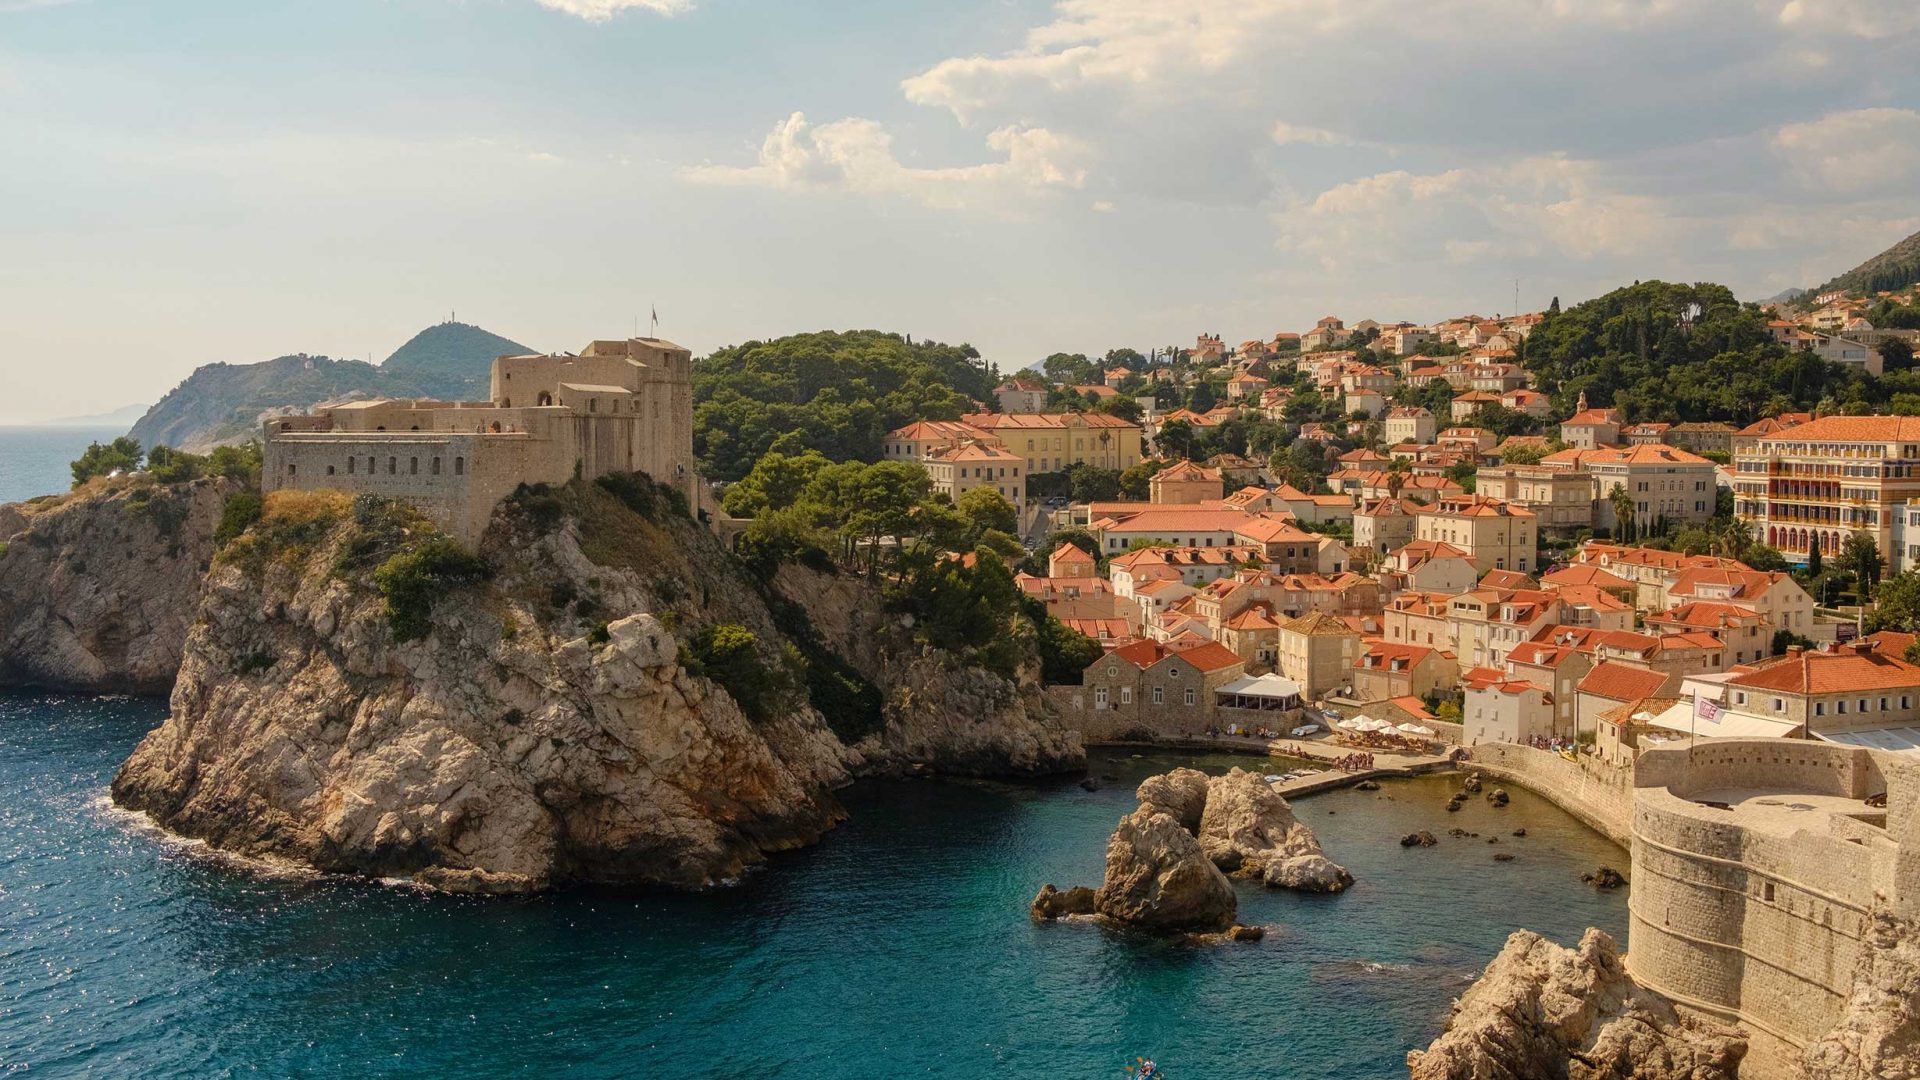 Events and Festival in Dubrovnik, Croatia